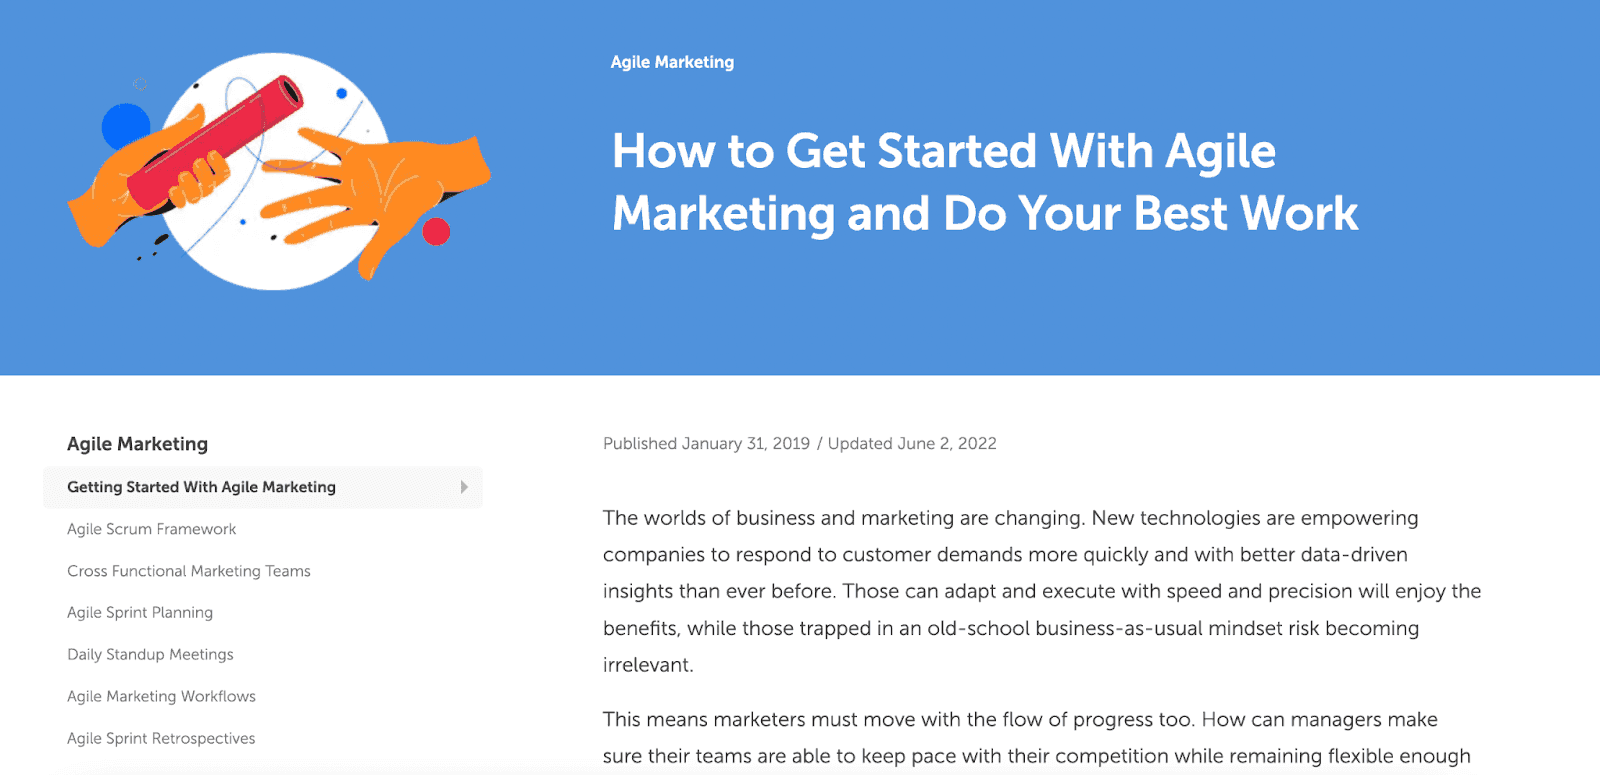 CoSchedule's agile marketing examples